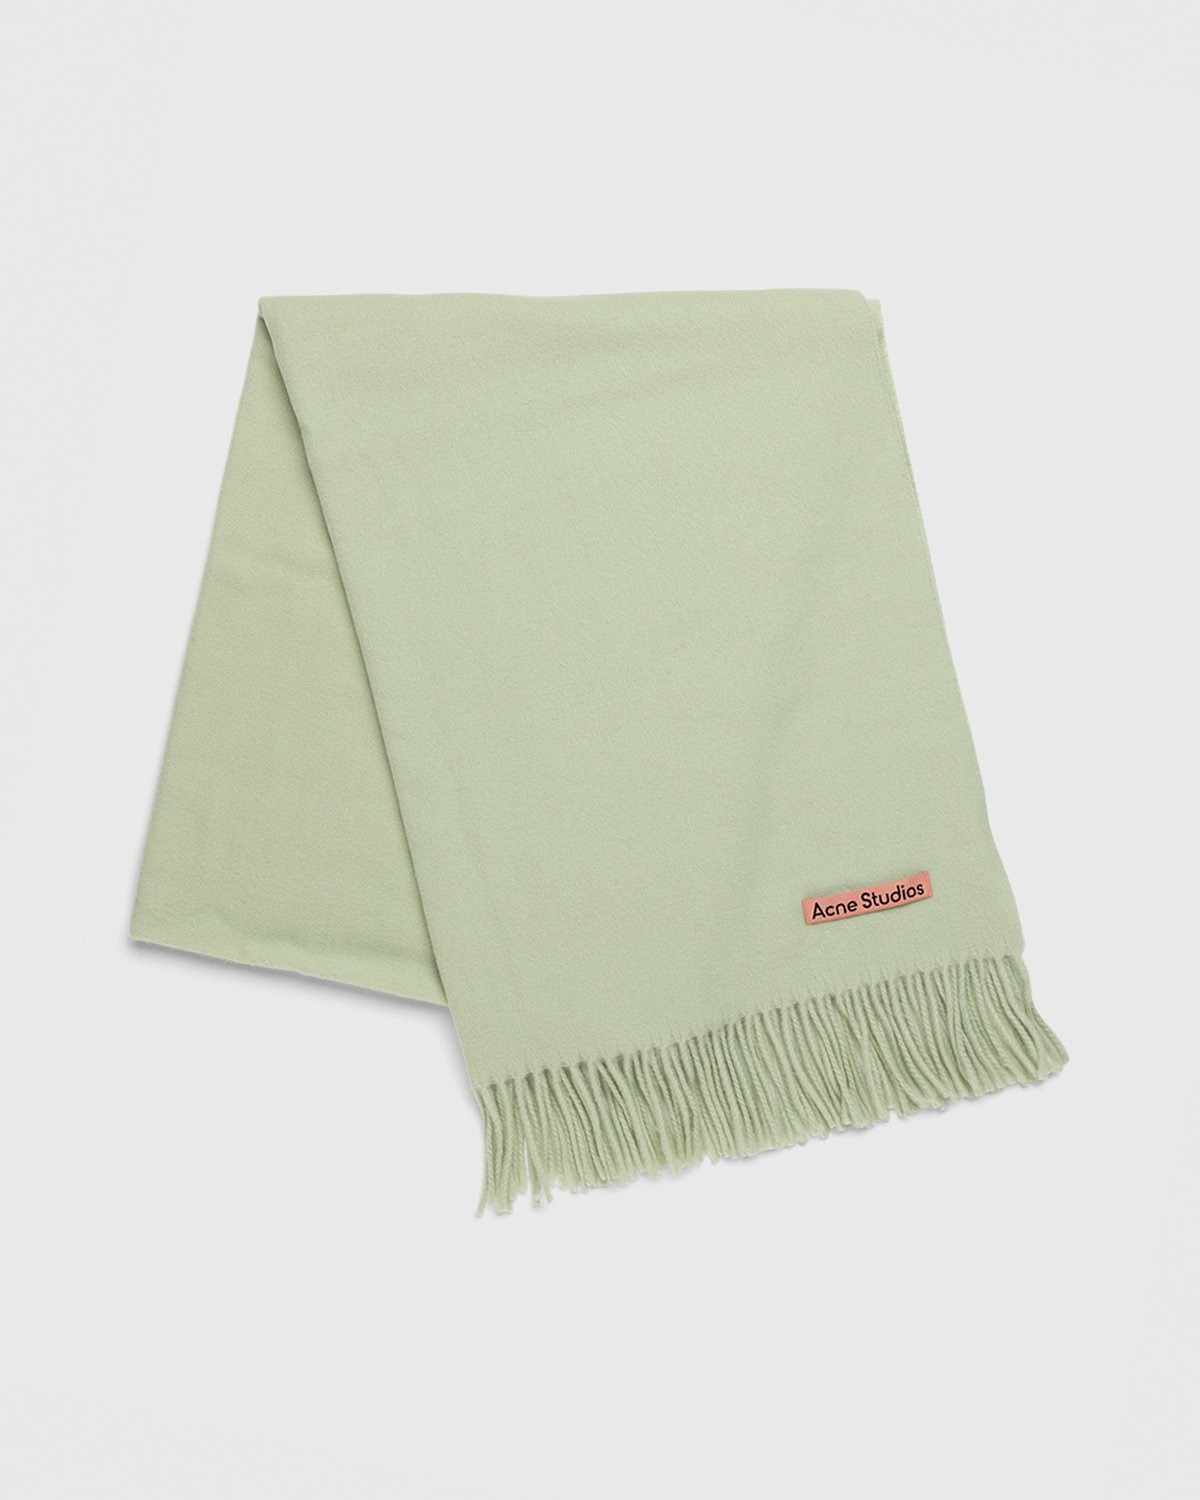 Acne Studios – Canada New Scarf Pale Green - Knits - Green - Image 1